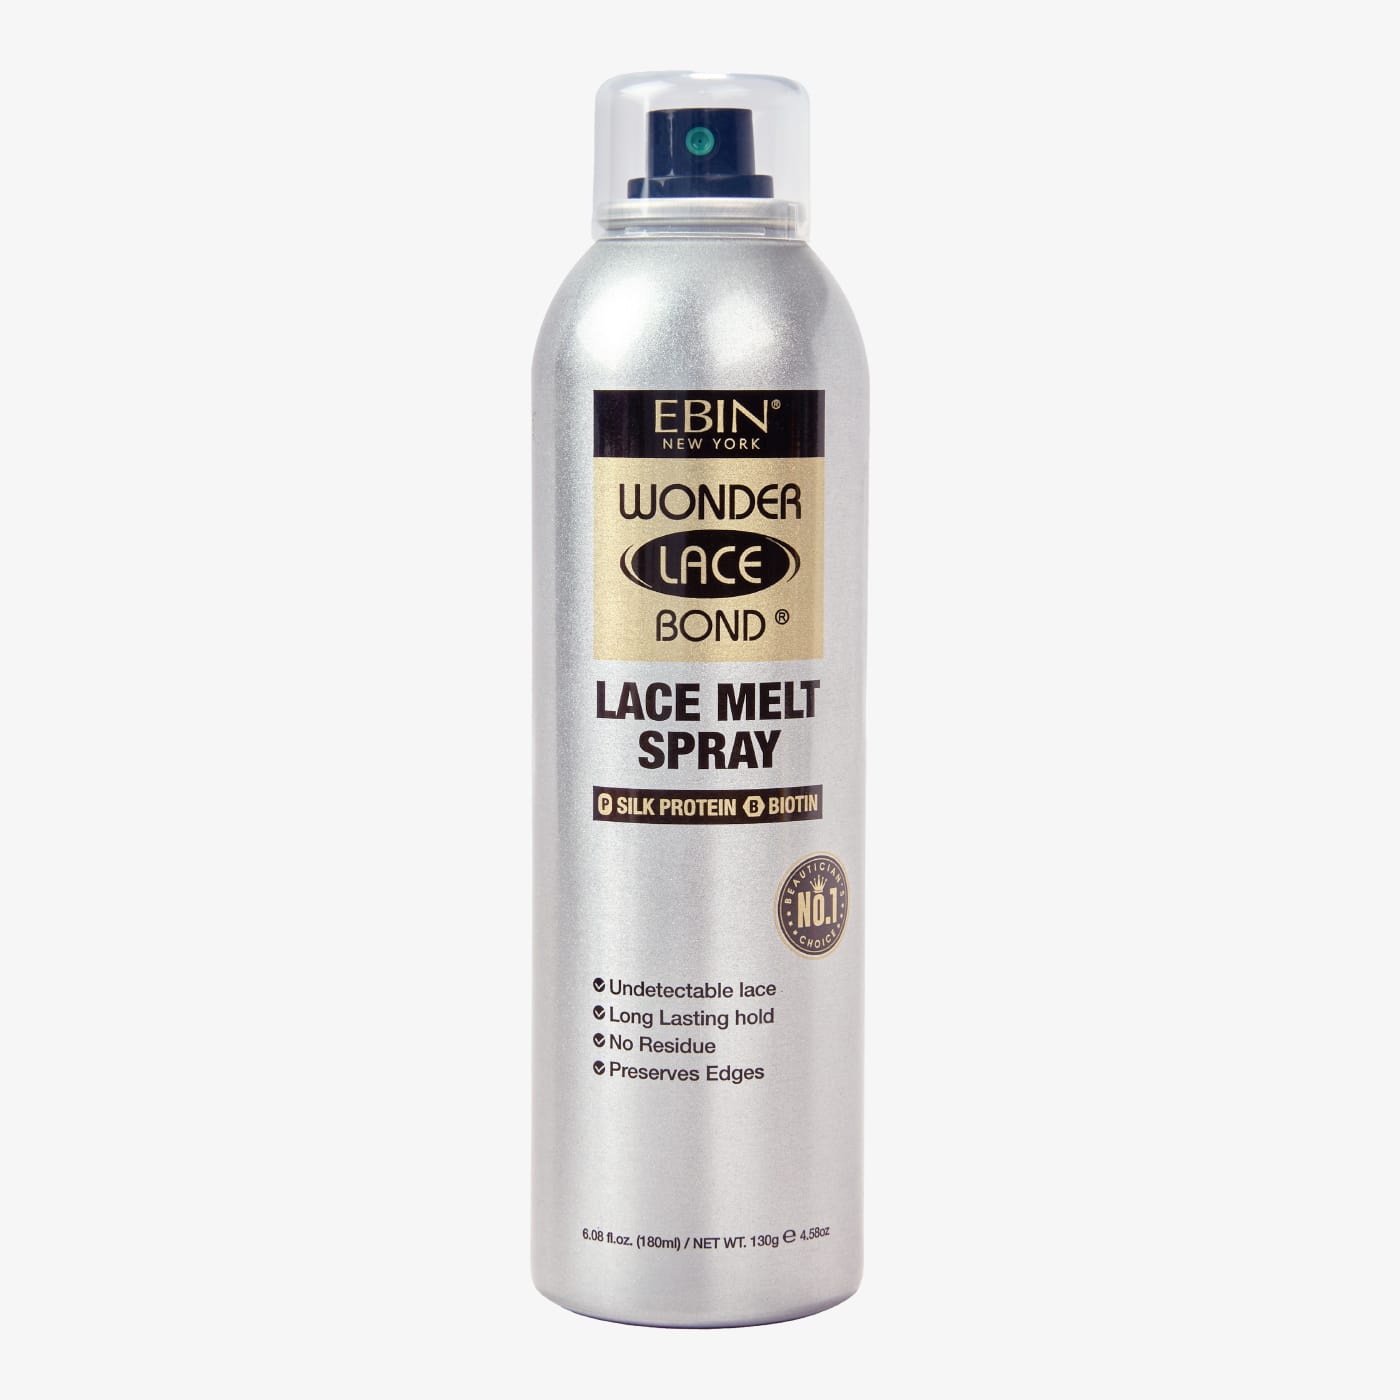 Lace Melting Spray Set: Achieve Seamless Wig Blending with